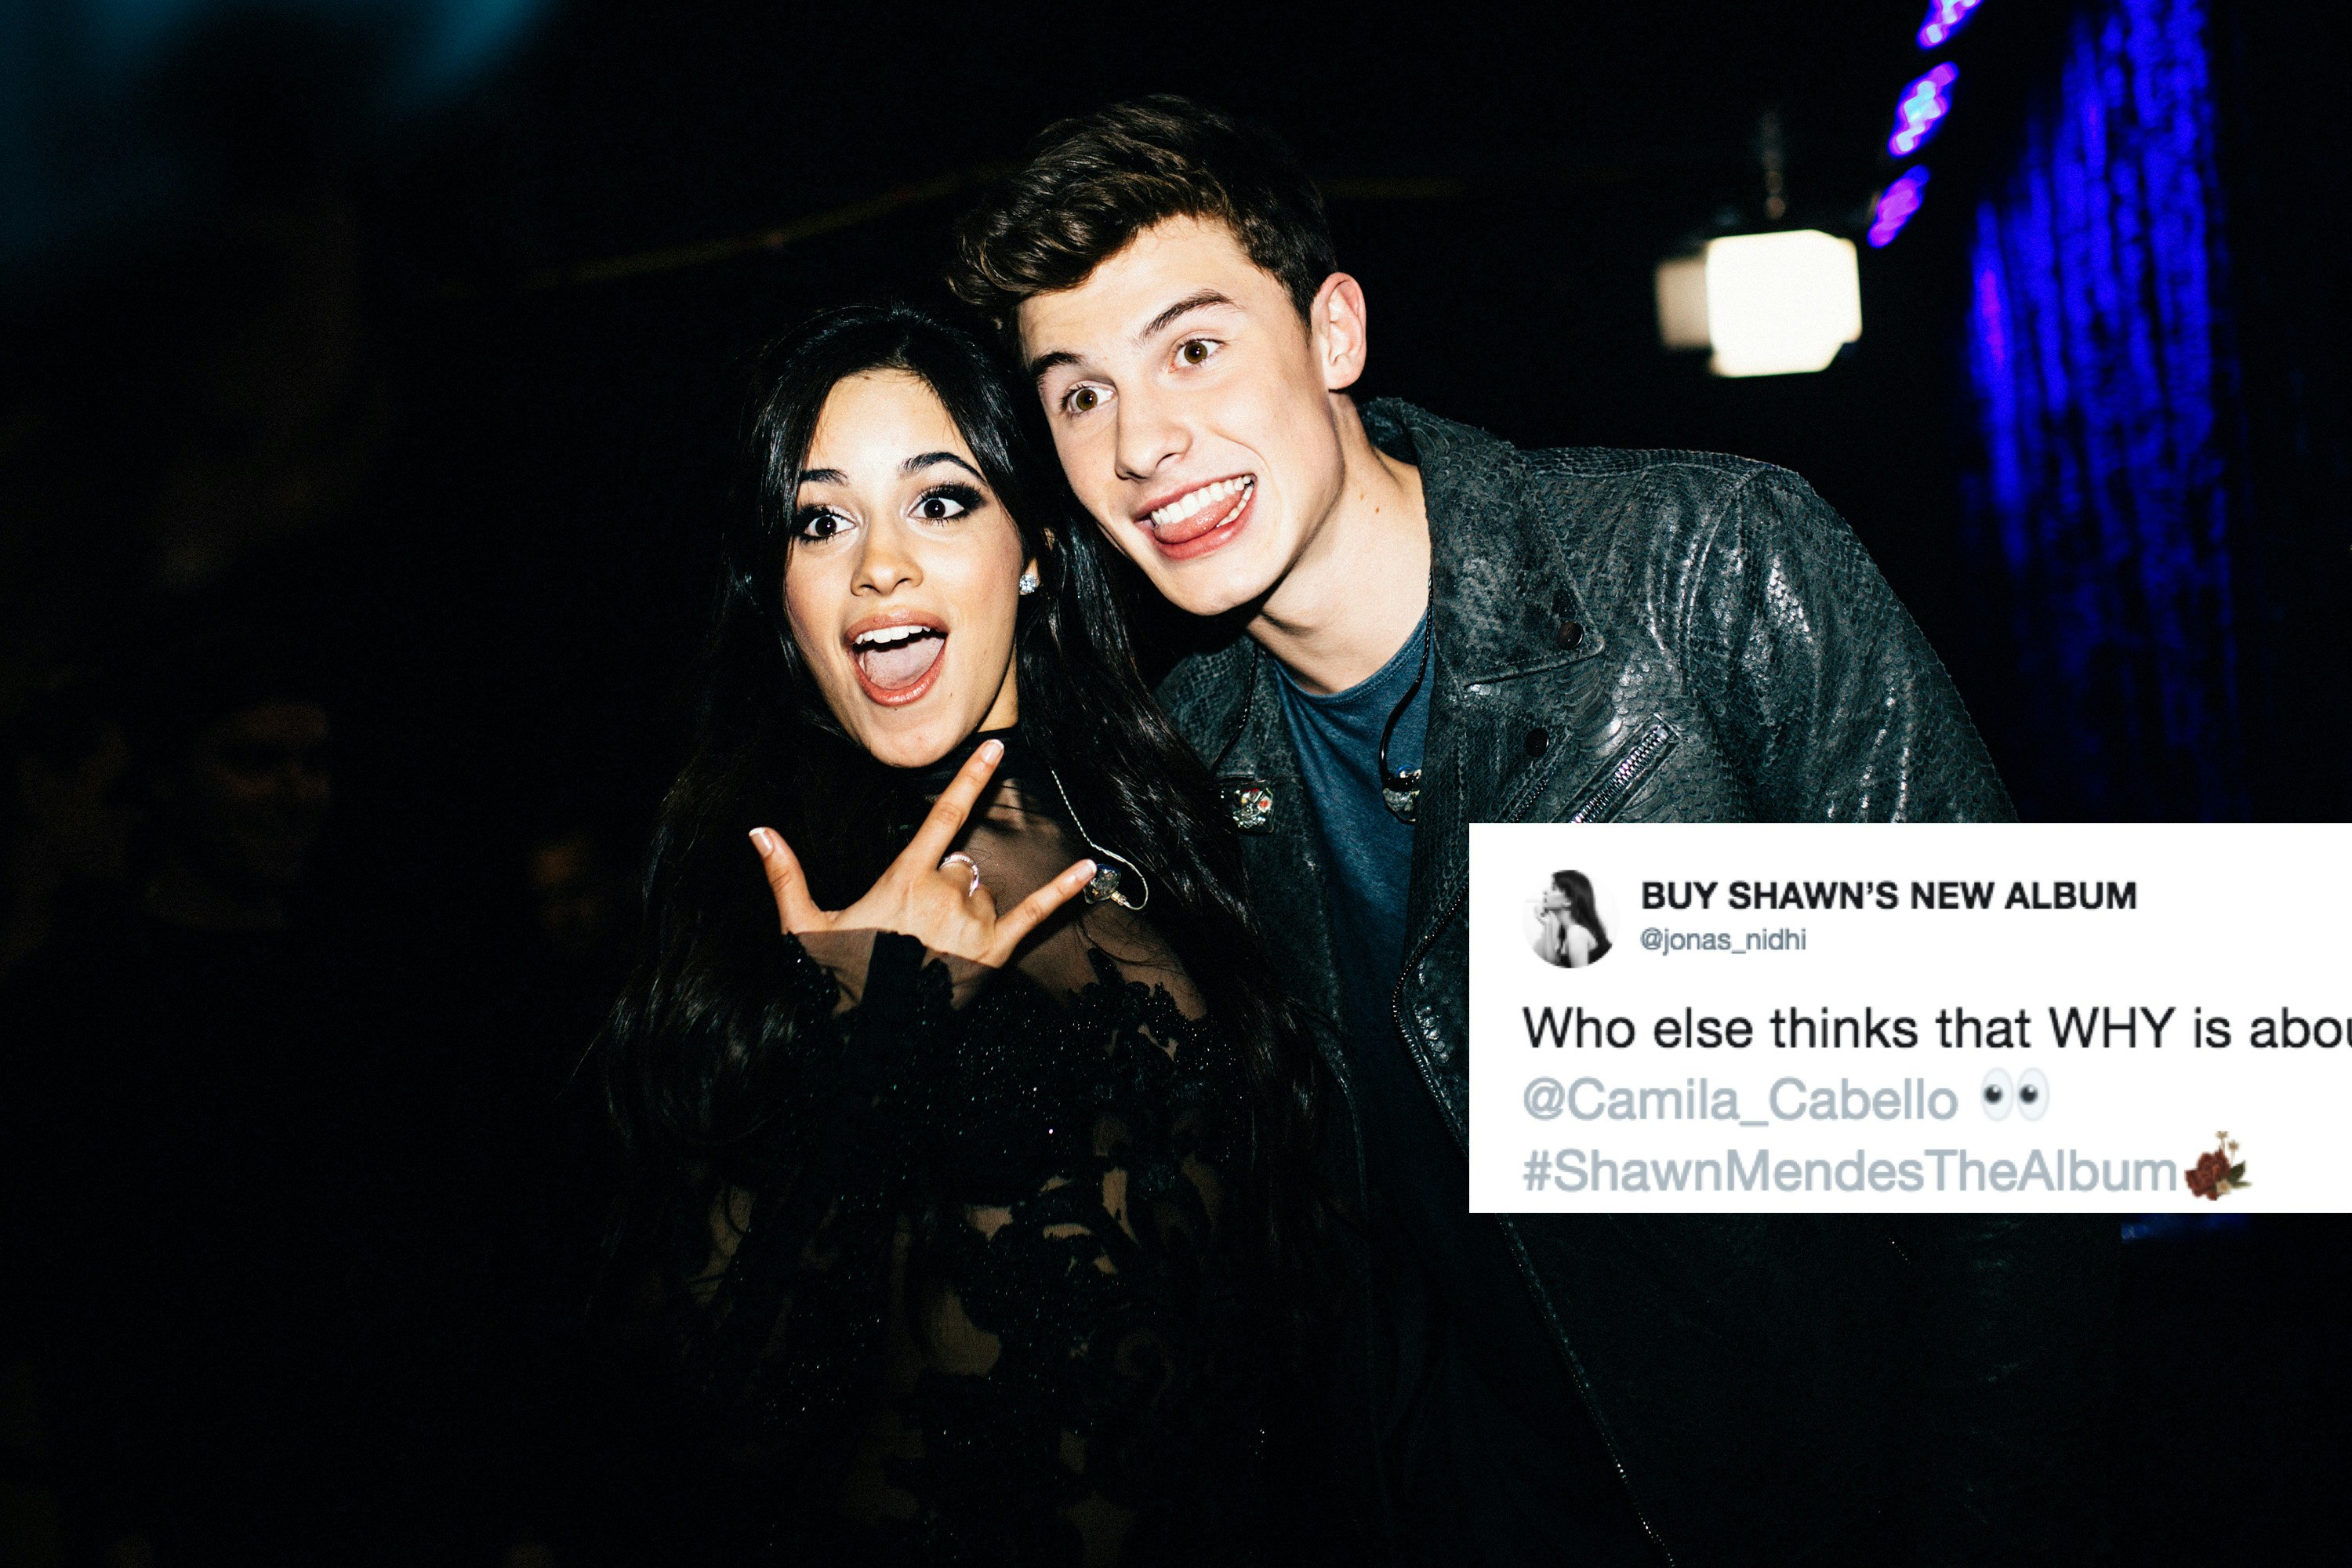 Is Shawn Mendes Why About Camila Cabello The Lyrics Have